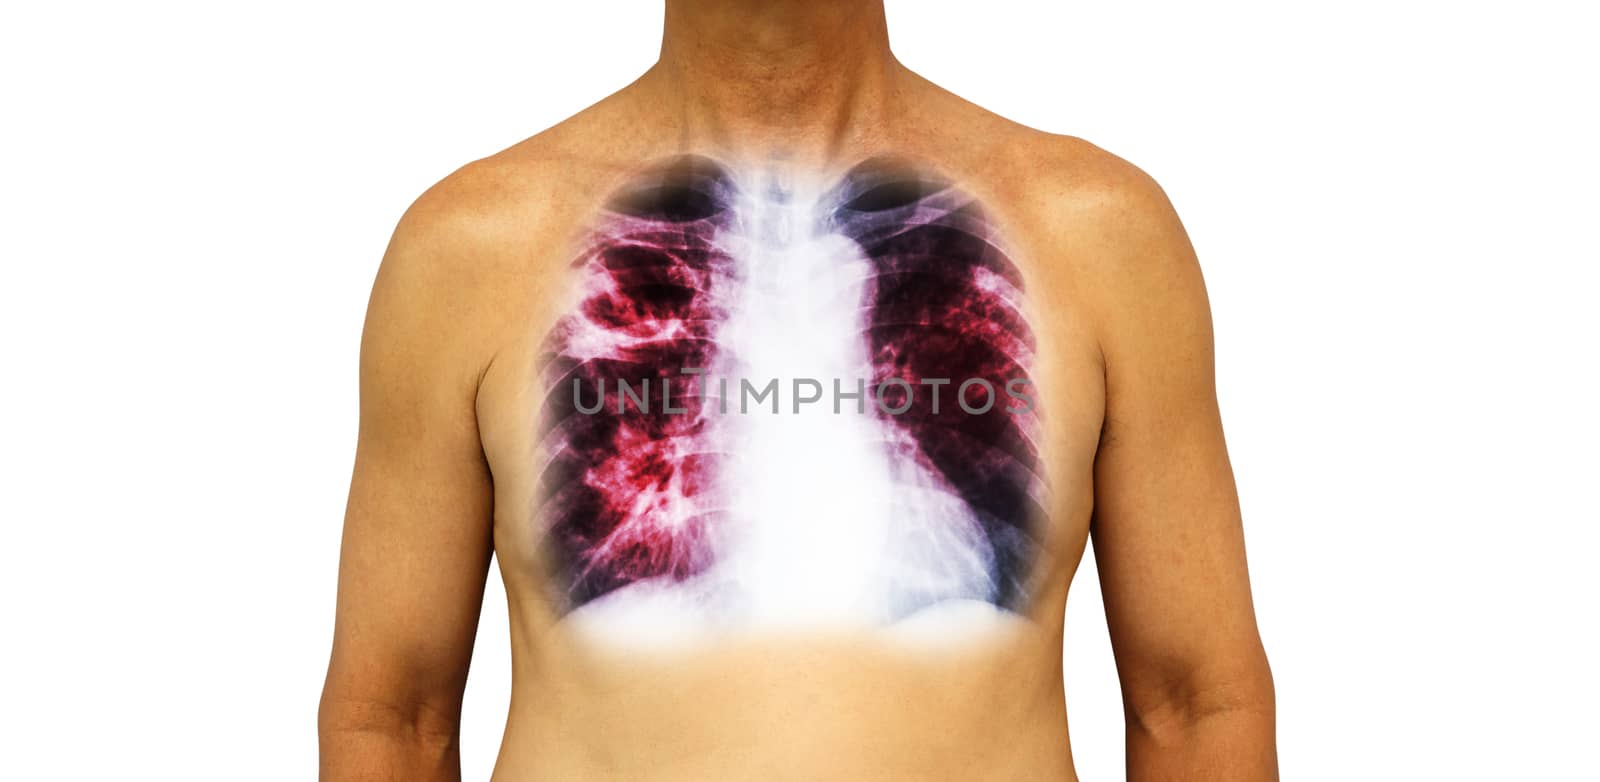 Pulmonary tuberculosis . Human chest with x-ray show cavity at right upper lung and interstitial infiltrate both lung due to infection . Isolated background .